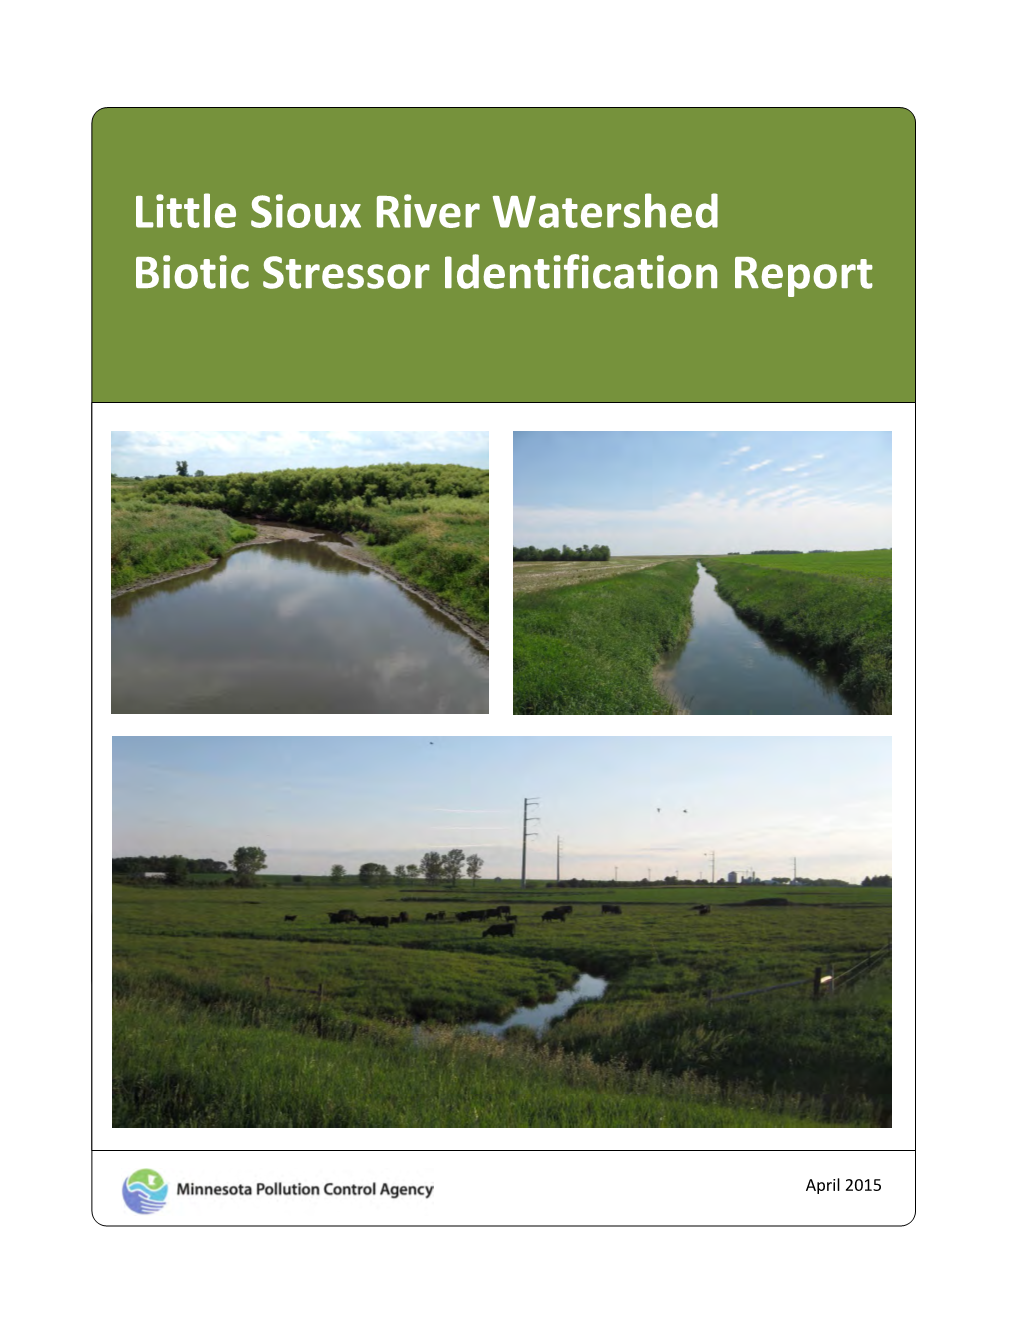 Little Sioux River Watershed Biotic Stressor Identification Report